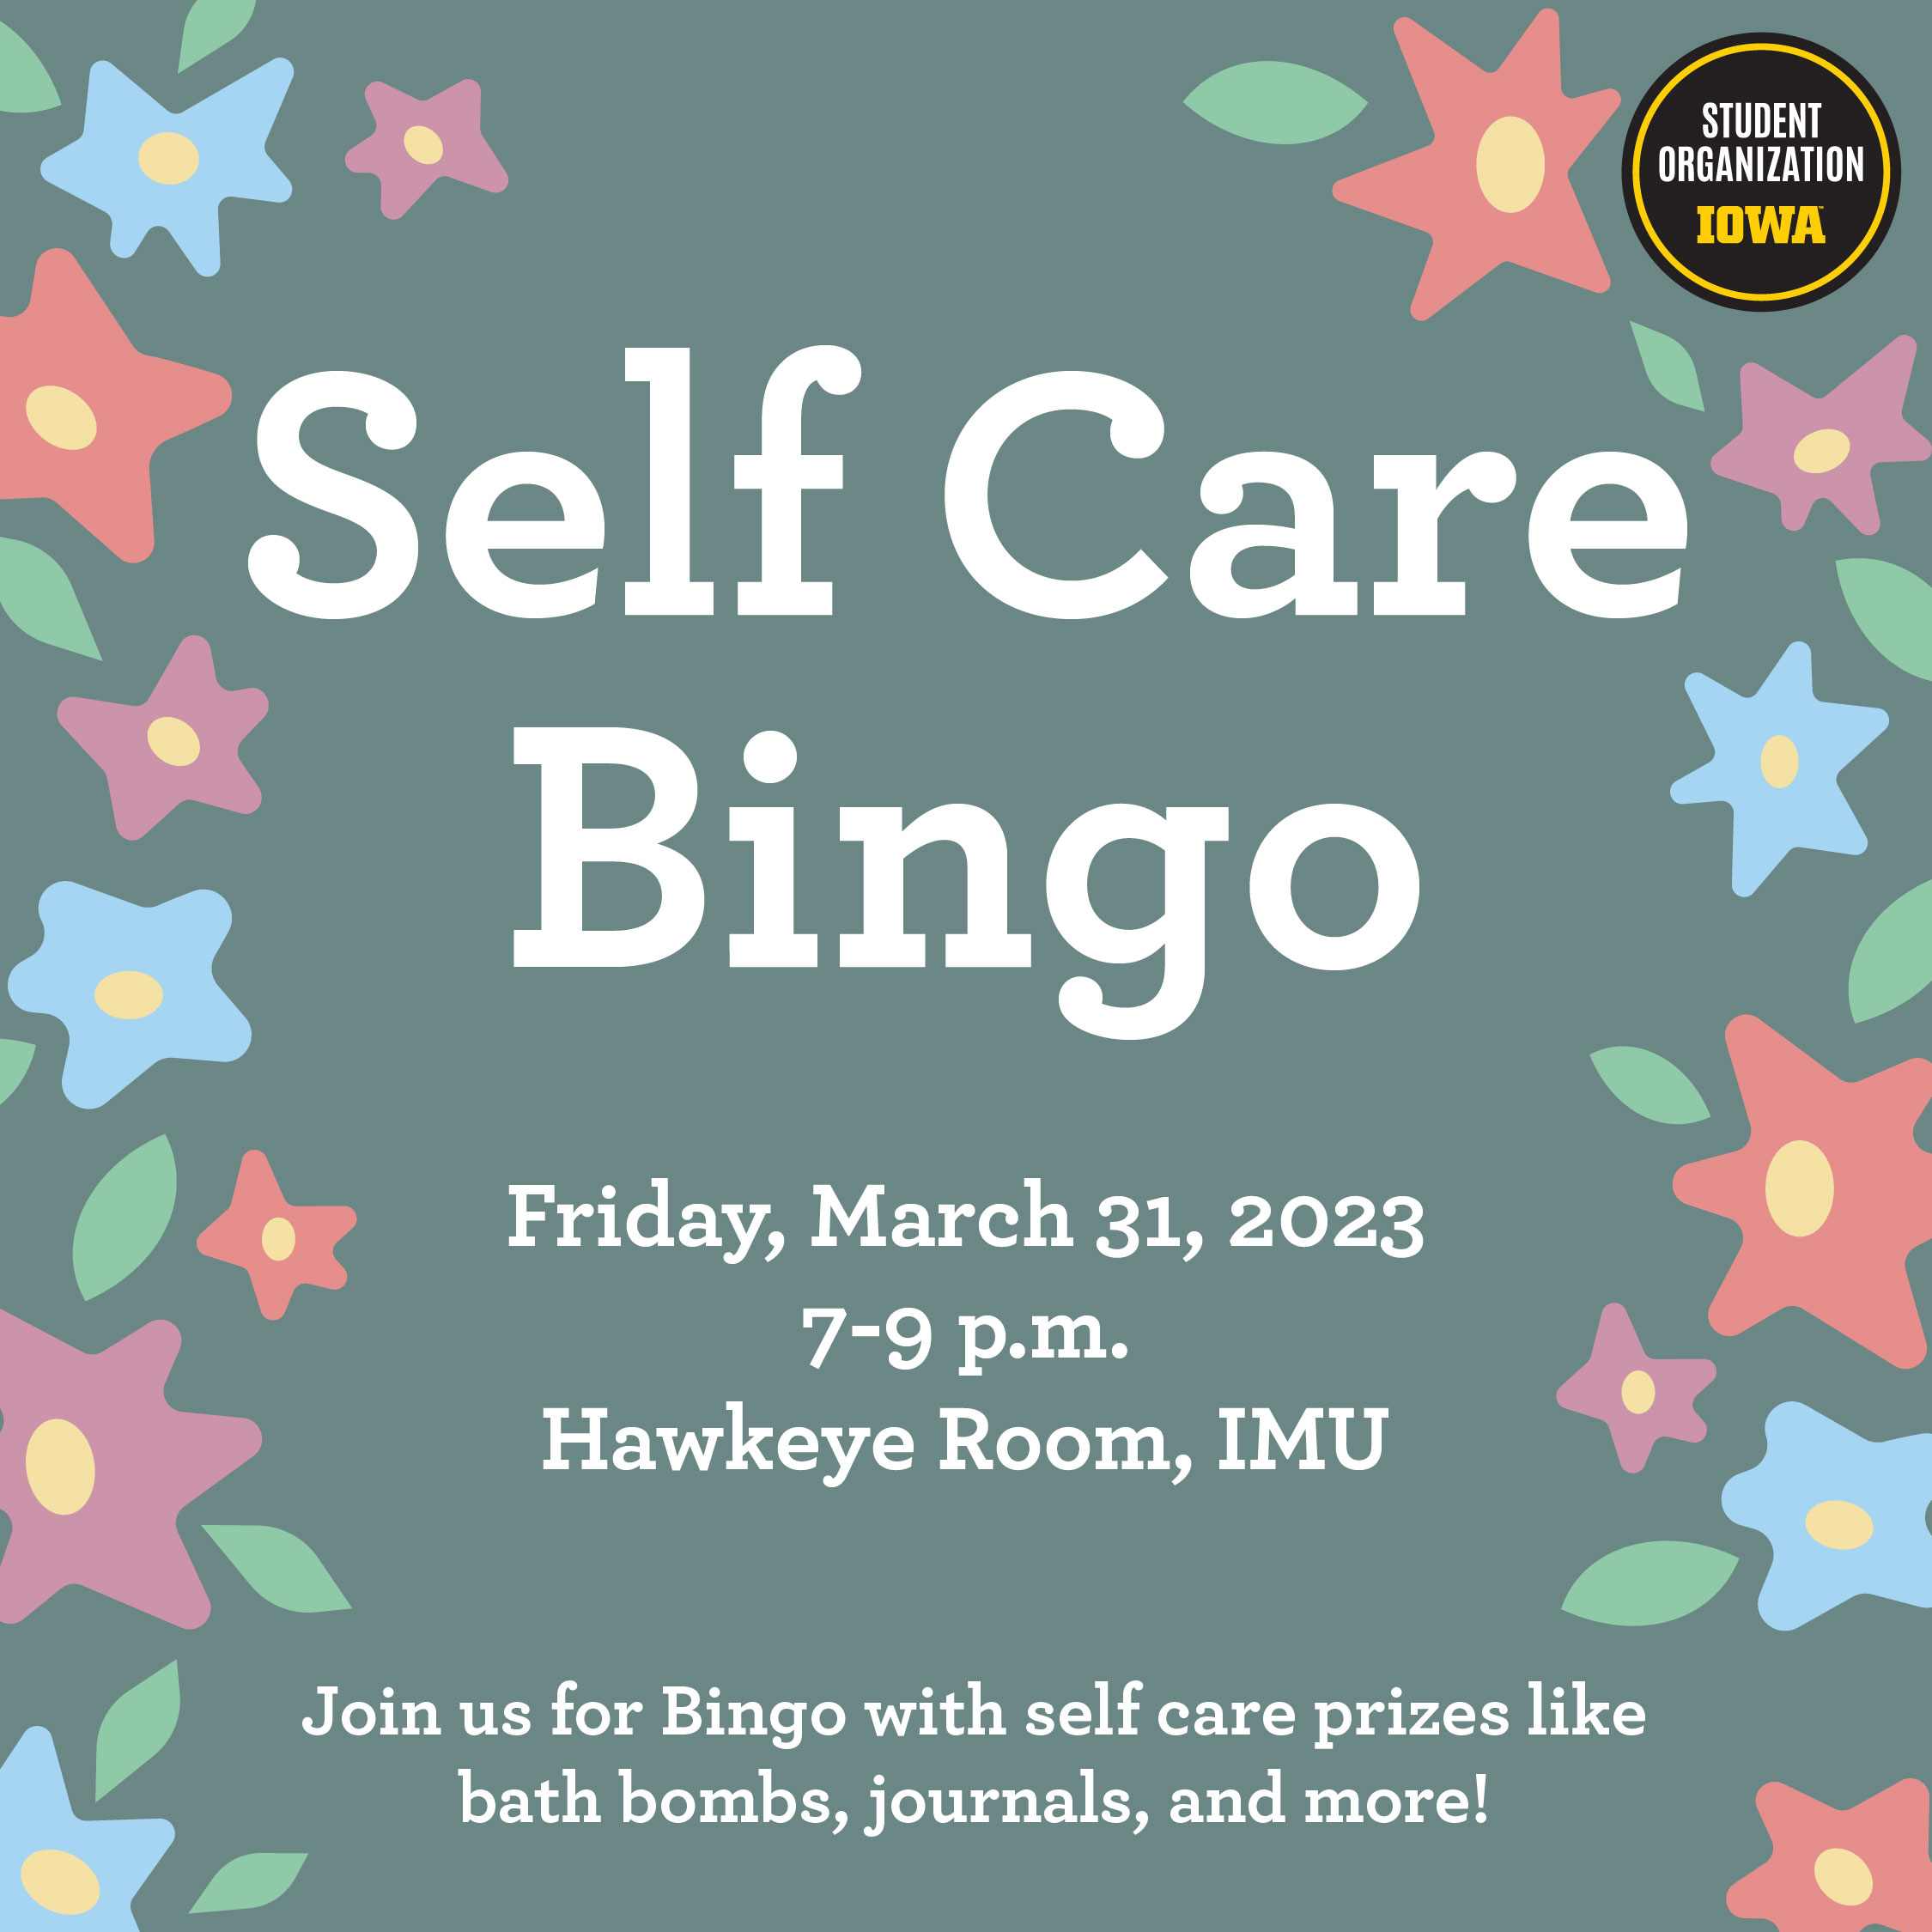 green background with text in the middle that says "Self Care Bingo, Friday, March 31, 2023 7-9 PM. Hawkeye Room, IMU. 